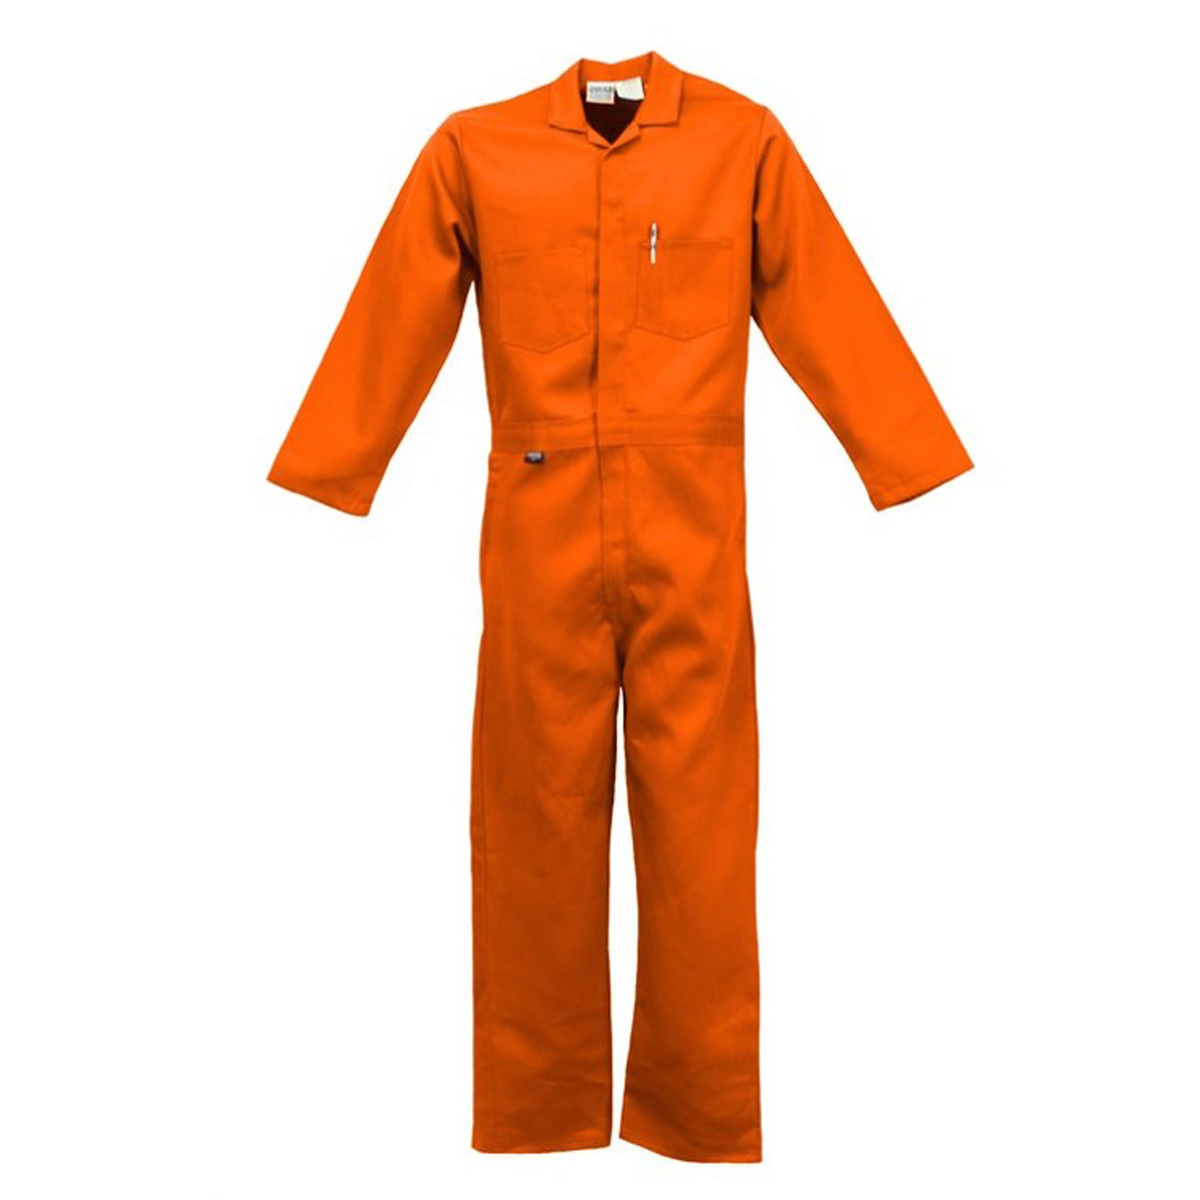 Stanco Safety Products™ Size 2X Tall Orange Indura® Arc Rated Flame Resistant Coveralls With Front Zipper Closure